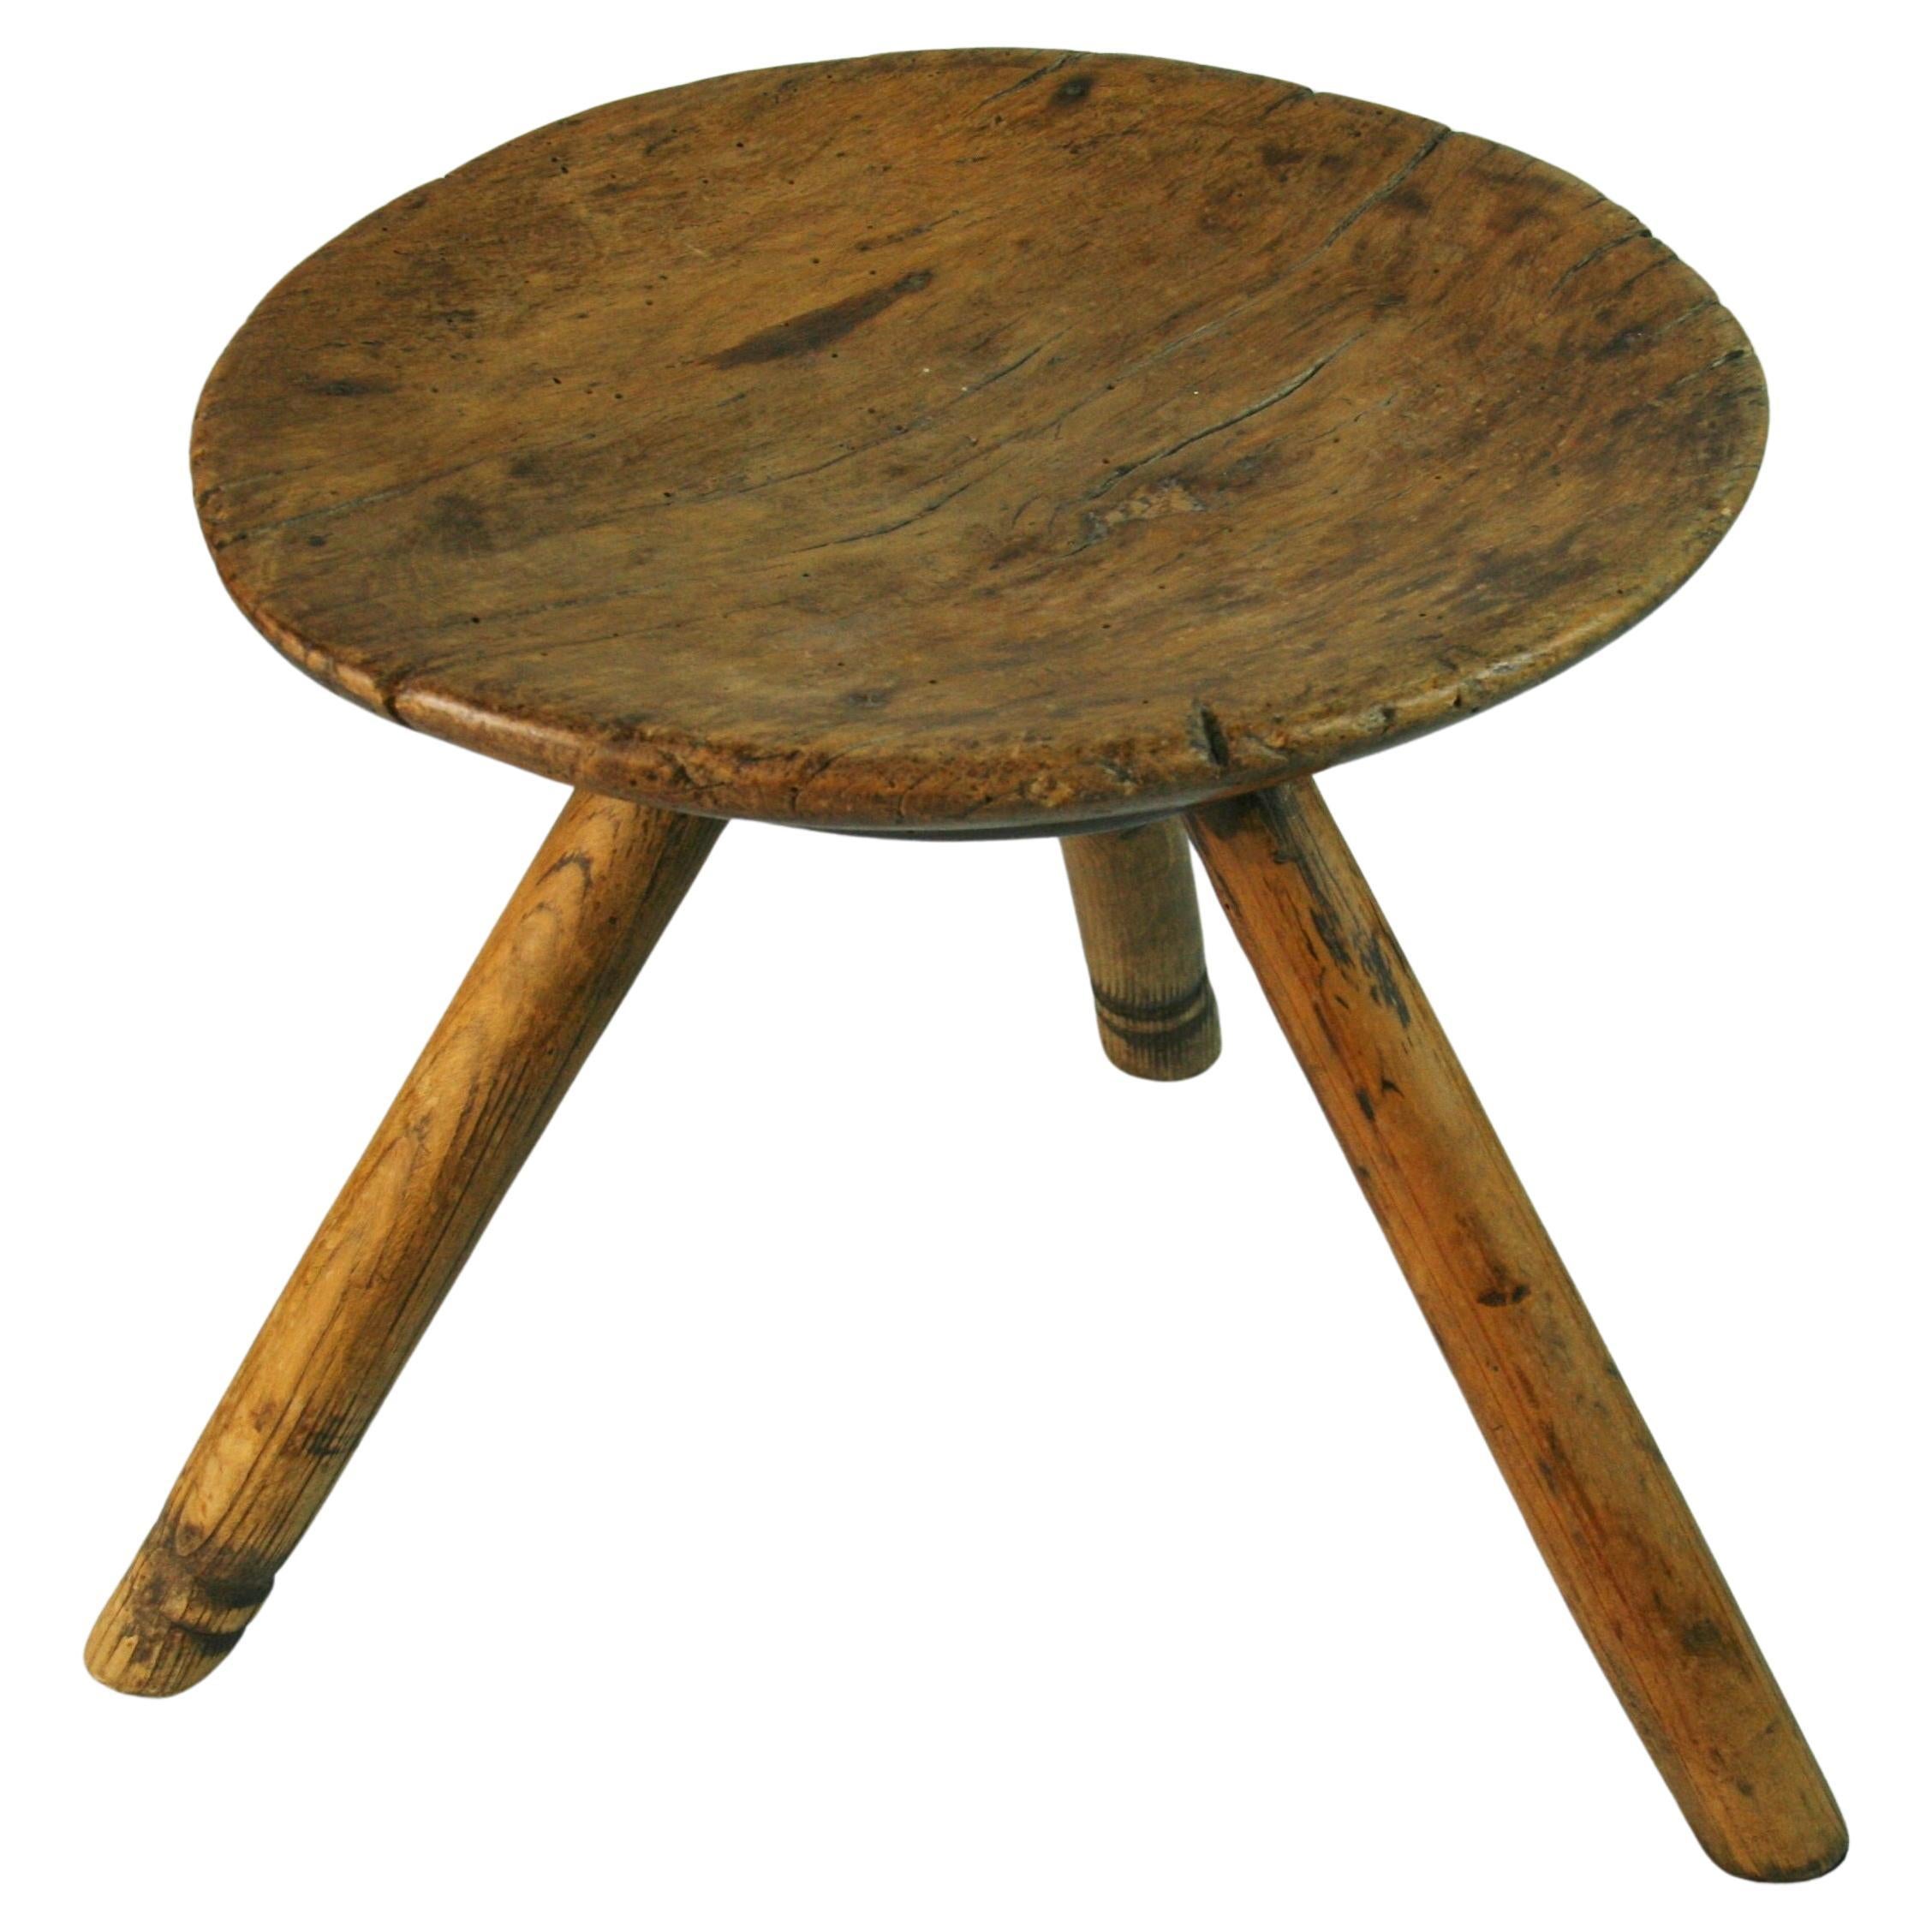 Antique Scandinavian Stool Late 19th Century For Sale